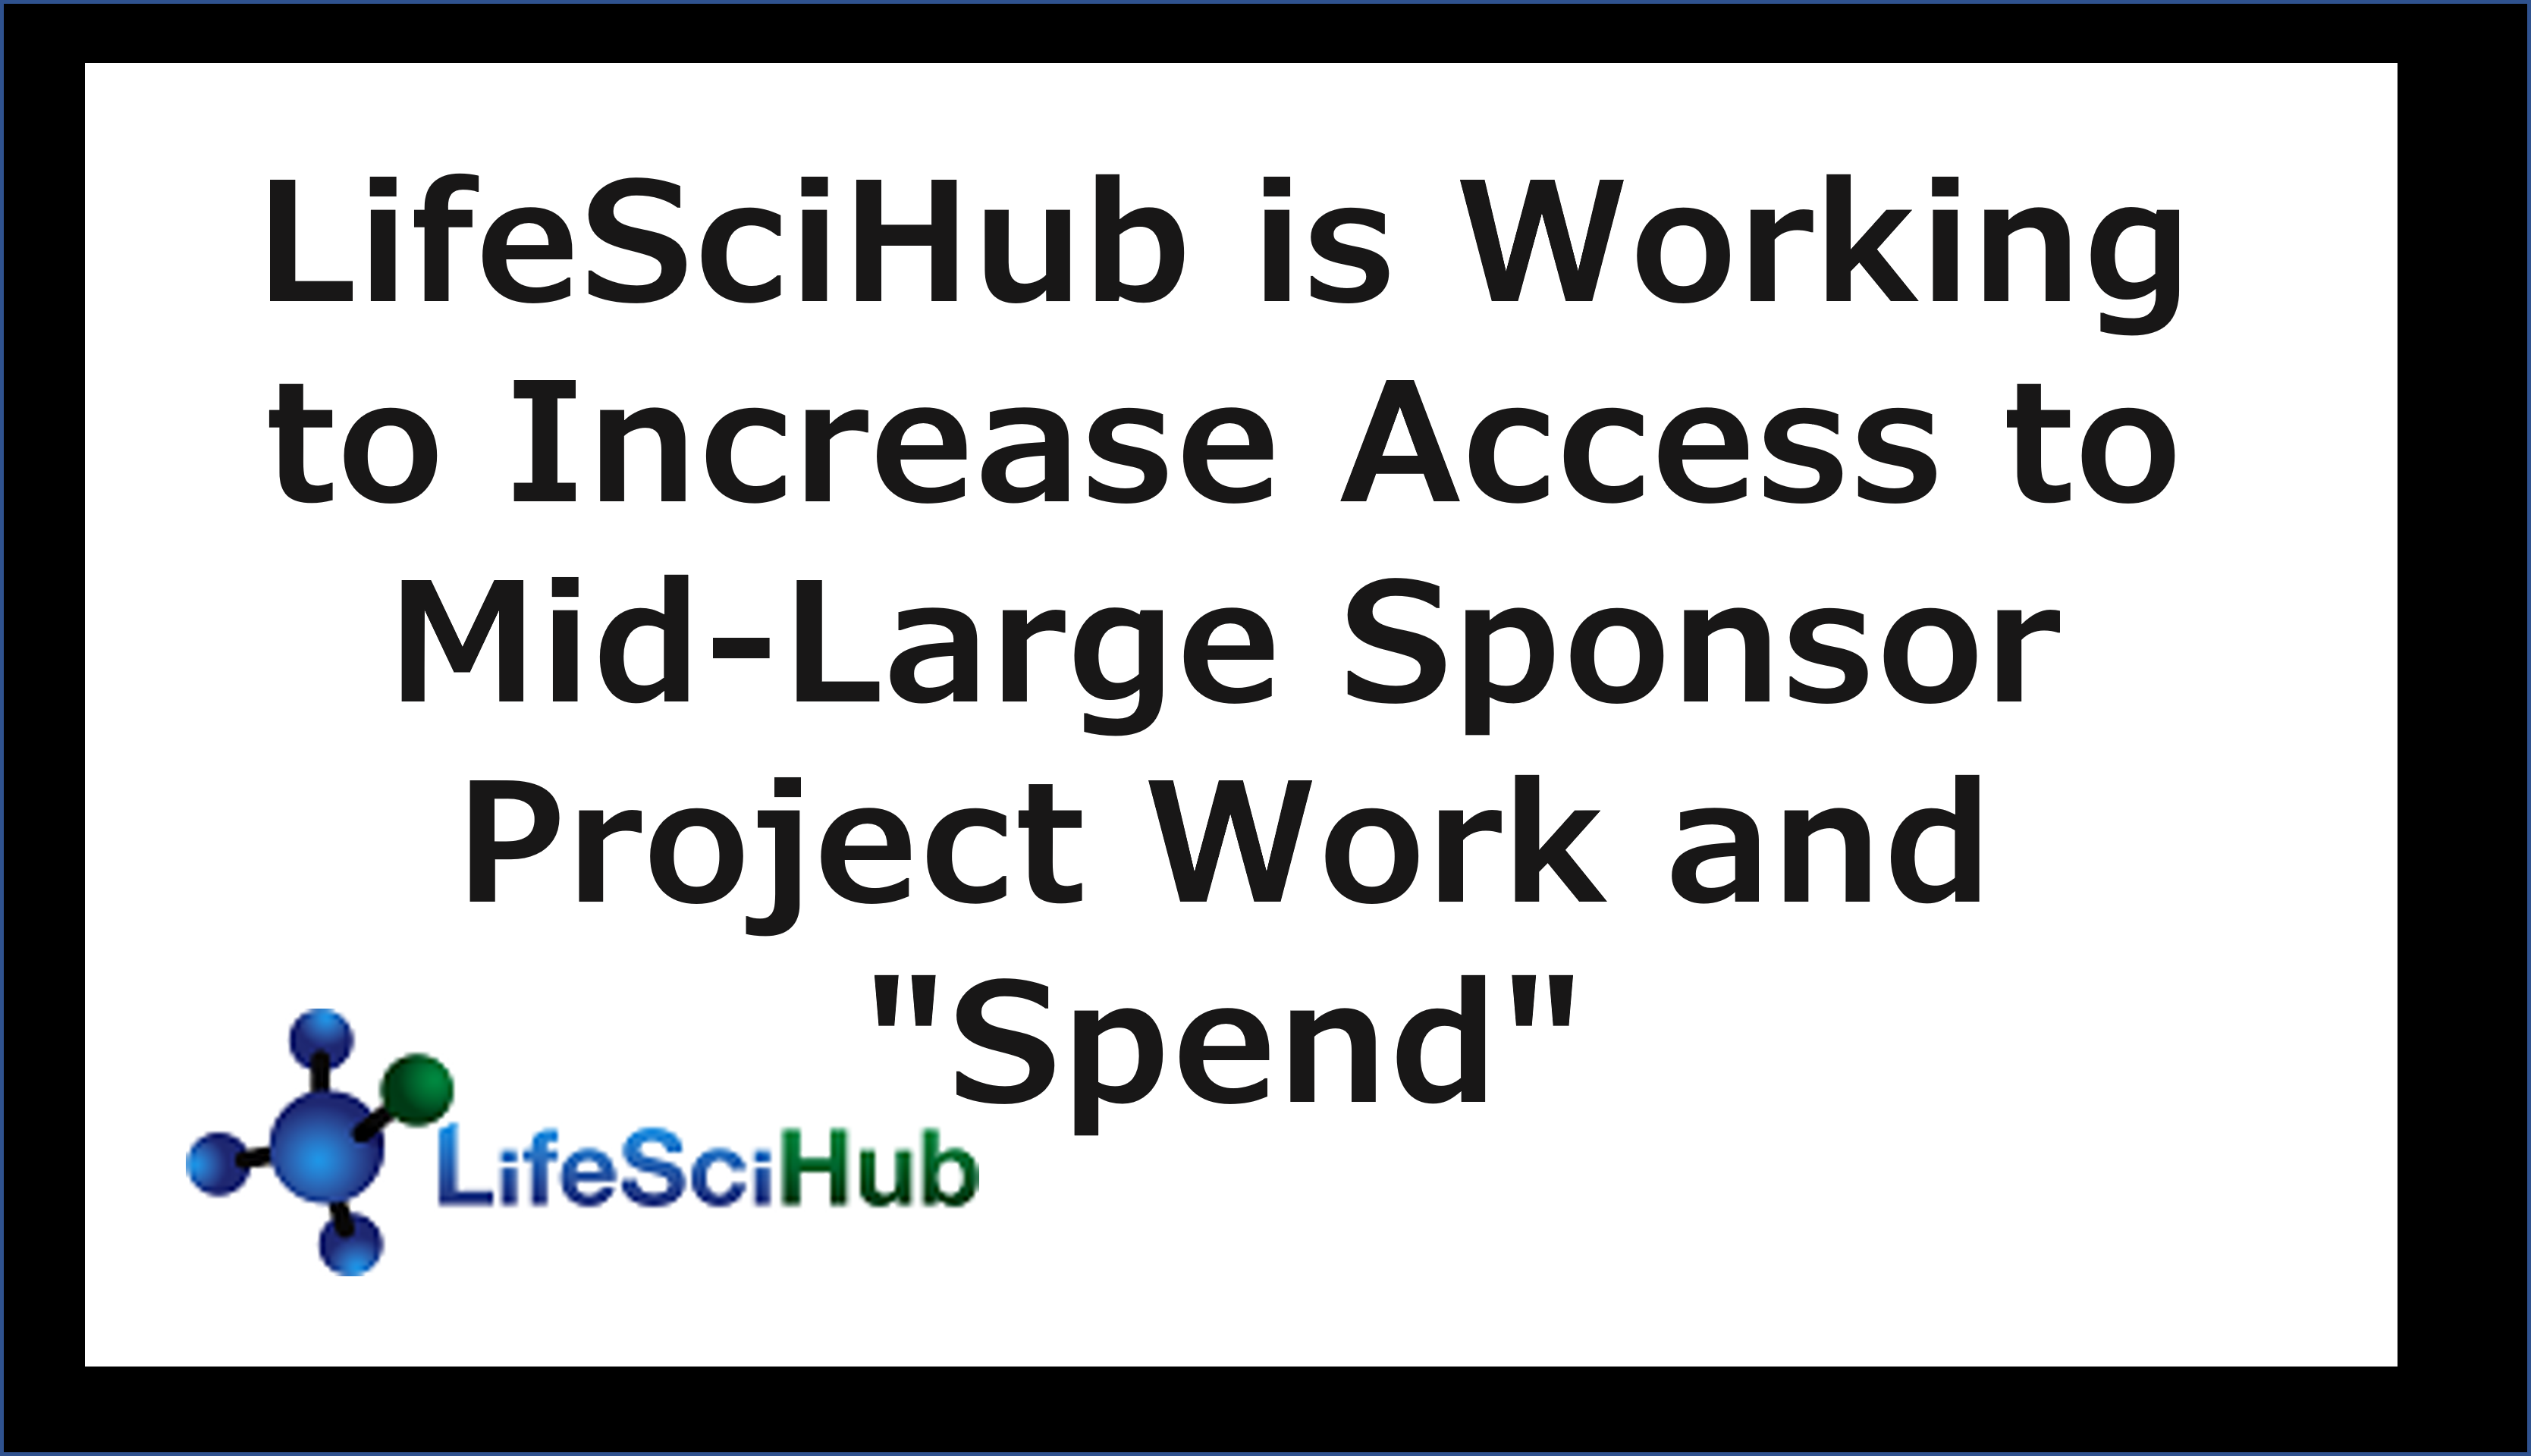 LifeSciHub is Working to Increase Small Business Access to Mid-Large Sponsor Project Work and 